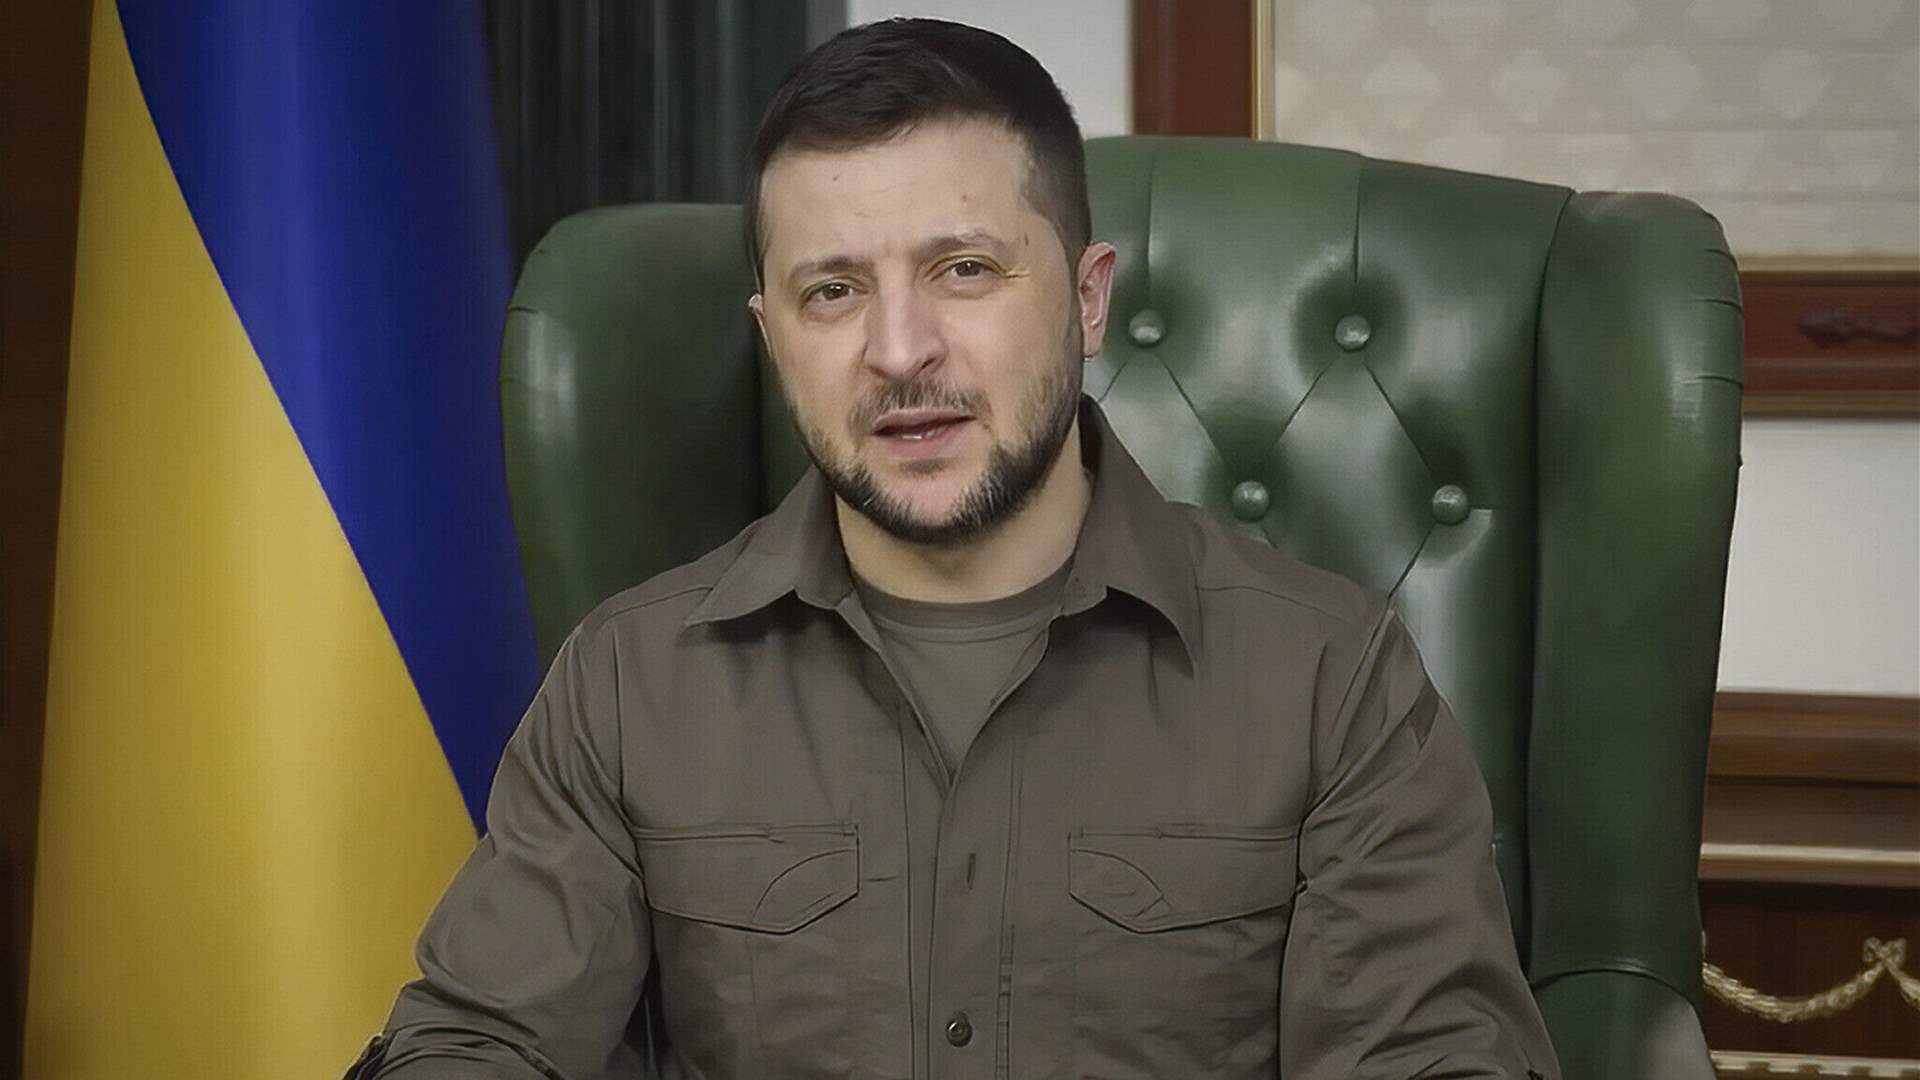 Zelensky publishes income as part of transparency drive